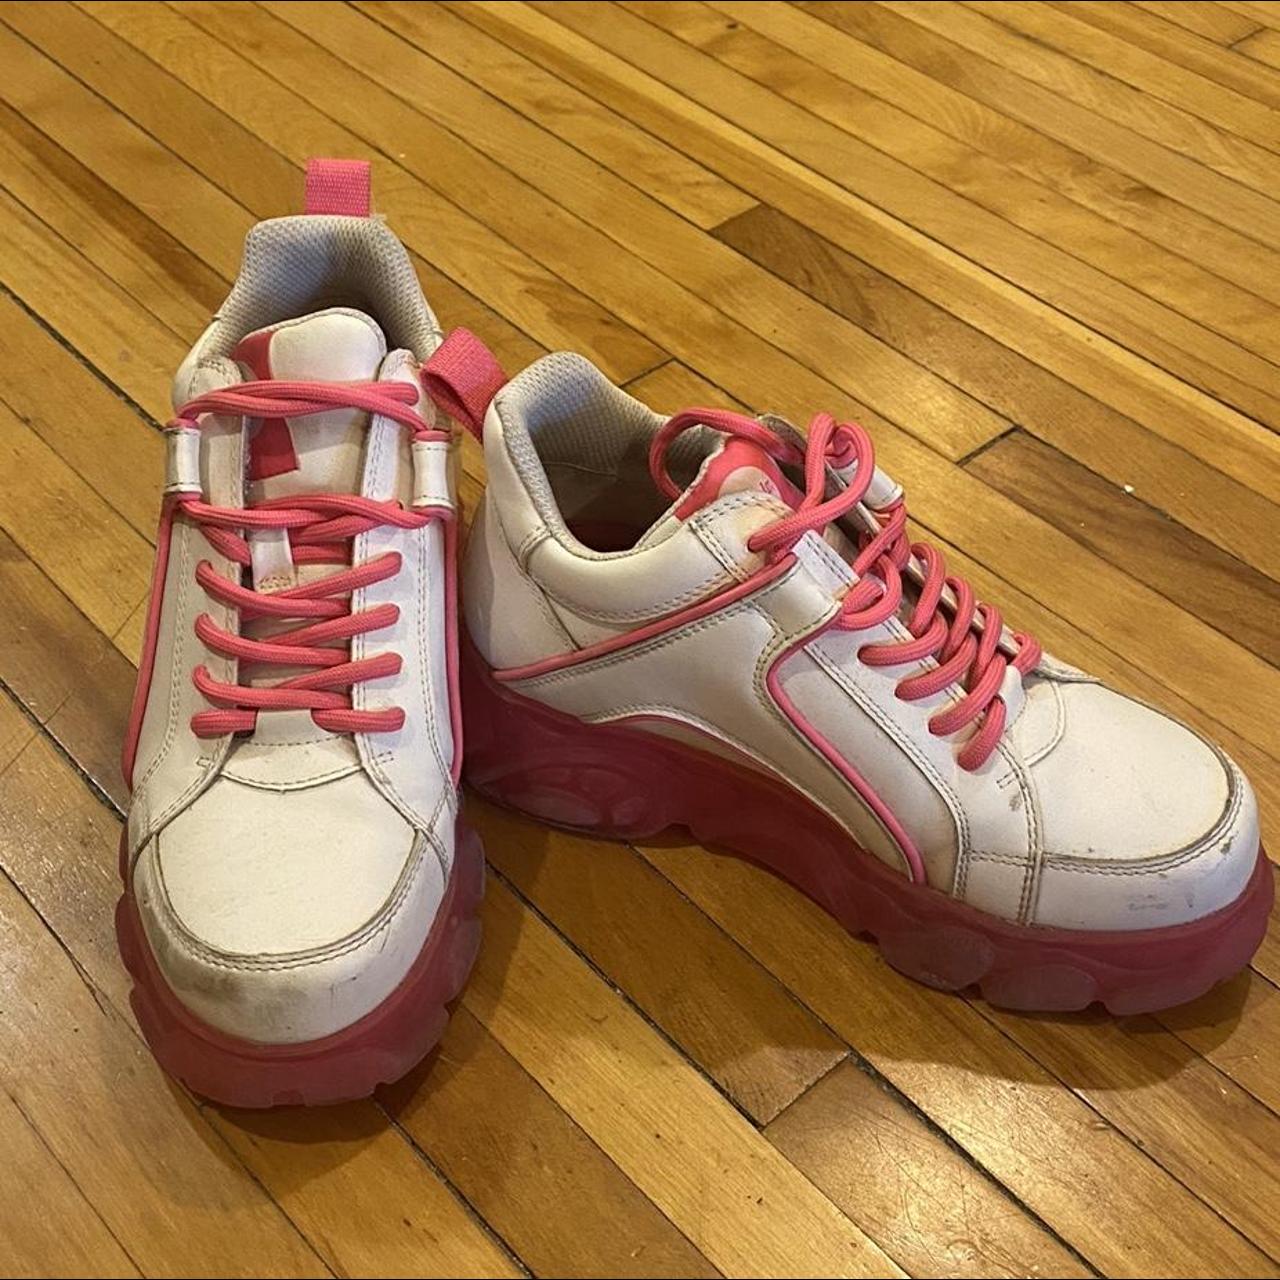 Buffalo London Women's Pink and White Trainers